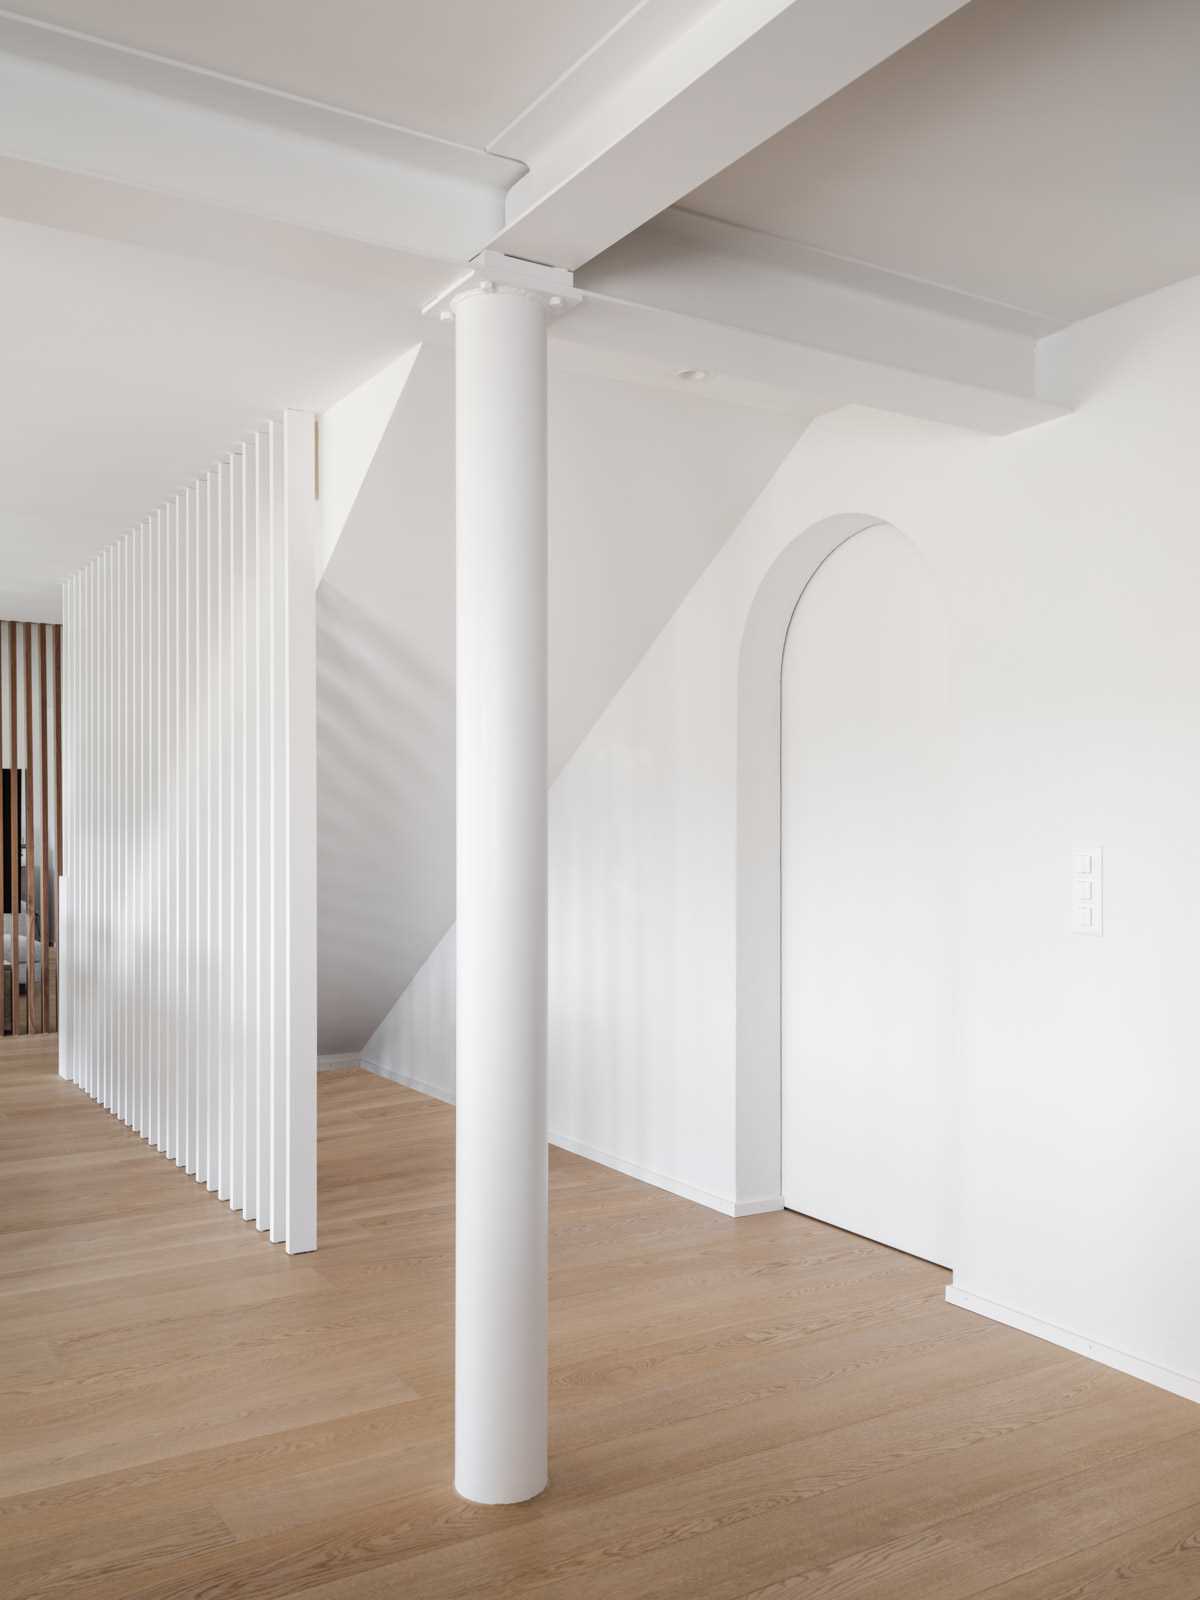 An arched doorway almost blends into its surrounds under the stairs.